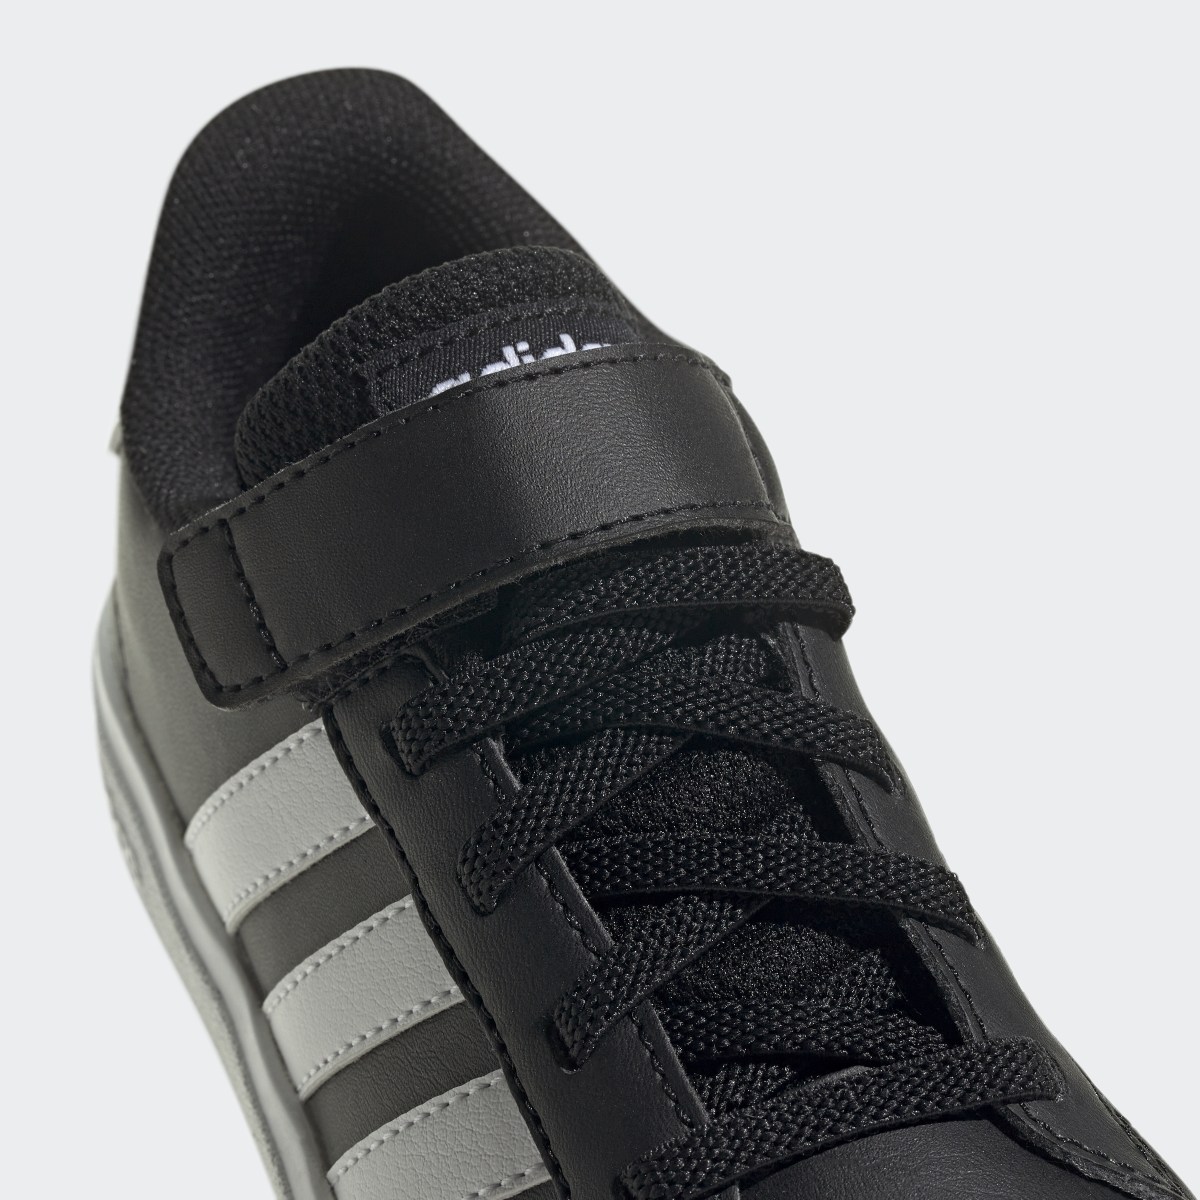 Adidas Grand Court Elastic Lace and Top Strap Shoes. 9